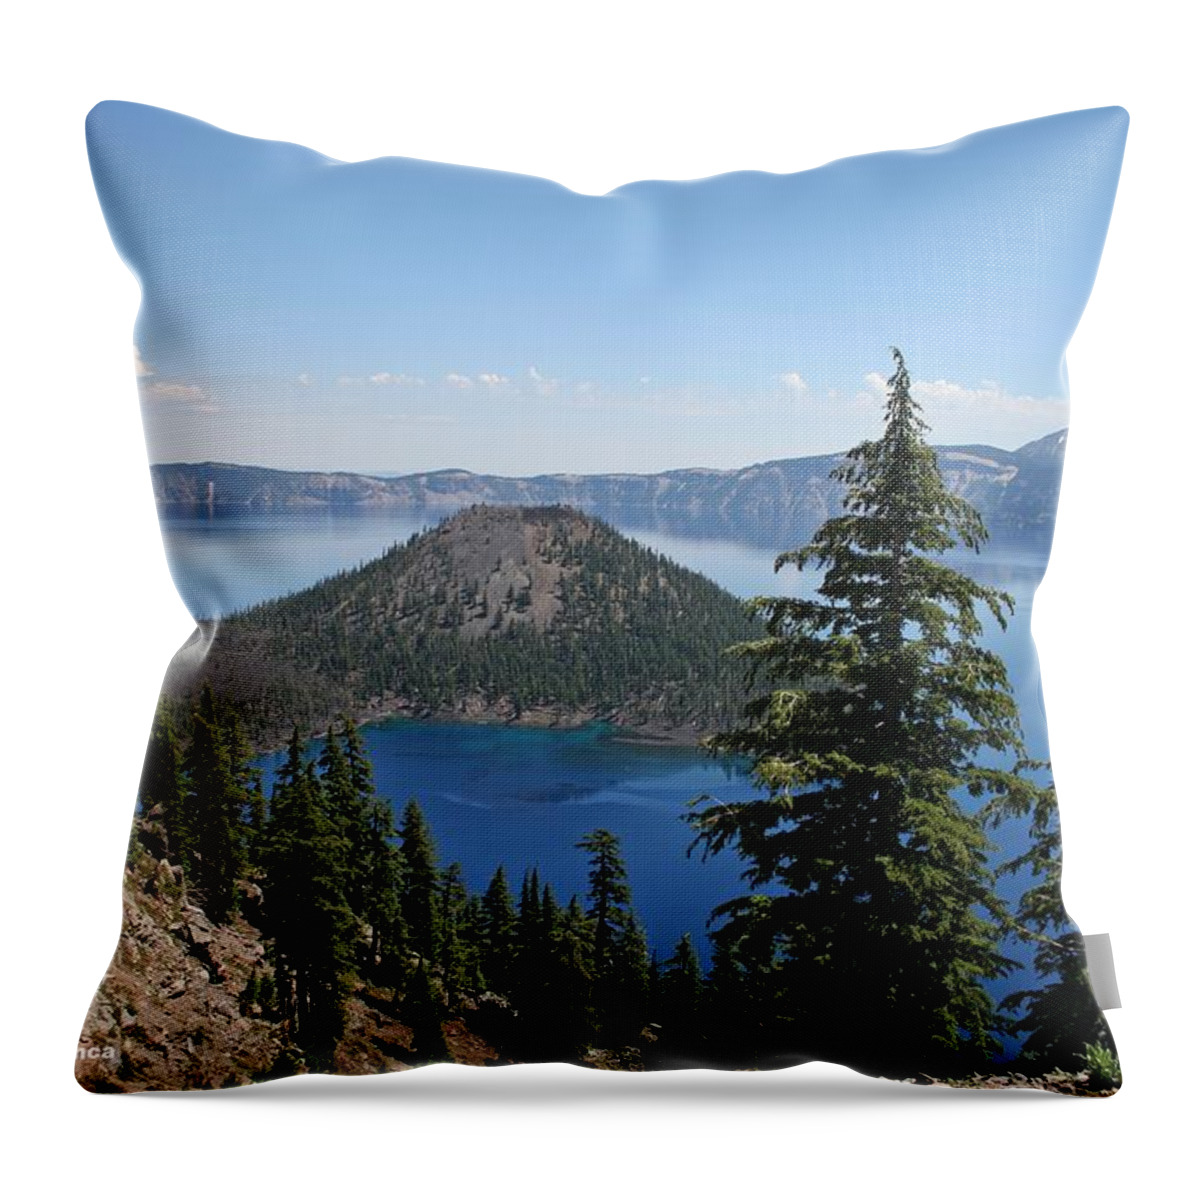 Crater Lake Oregon Throw Pillow featuring the photograph Crater Lake Oregon #1 by Tom Janca